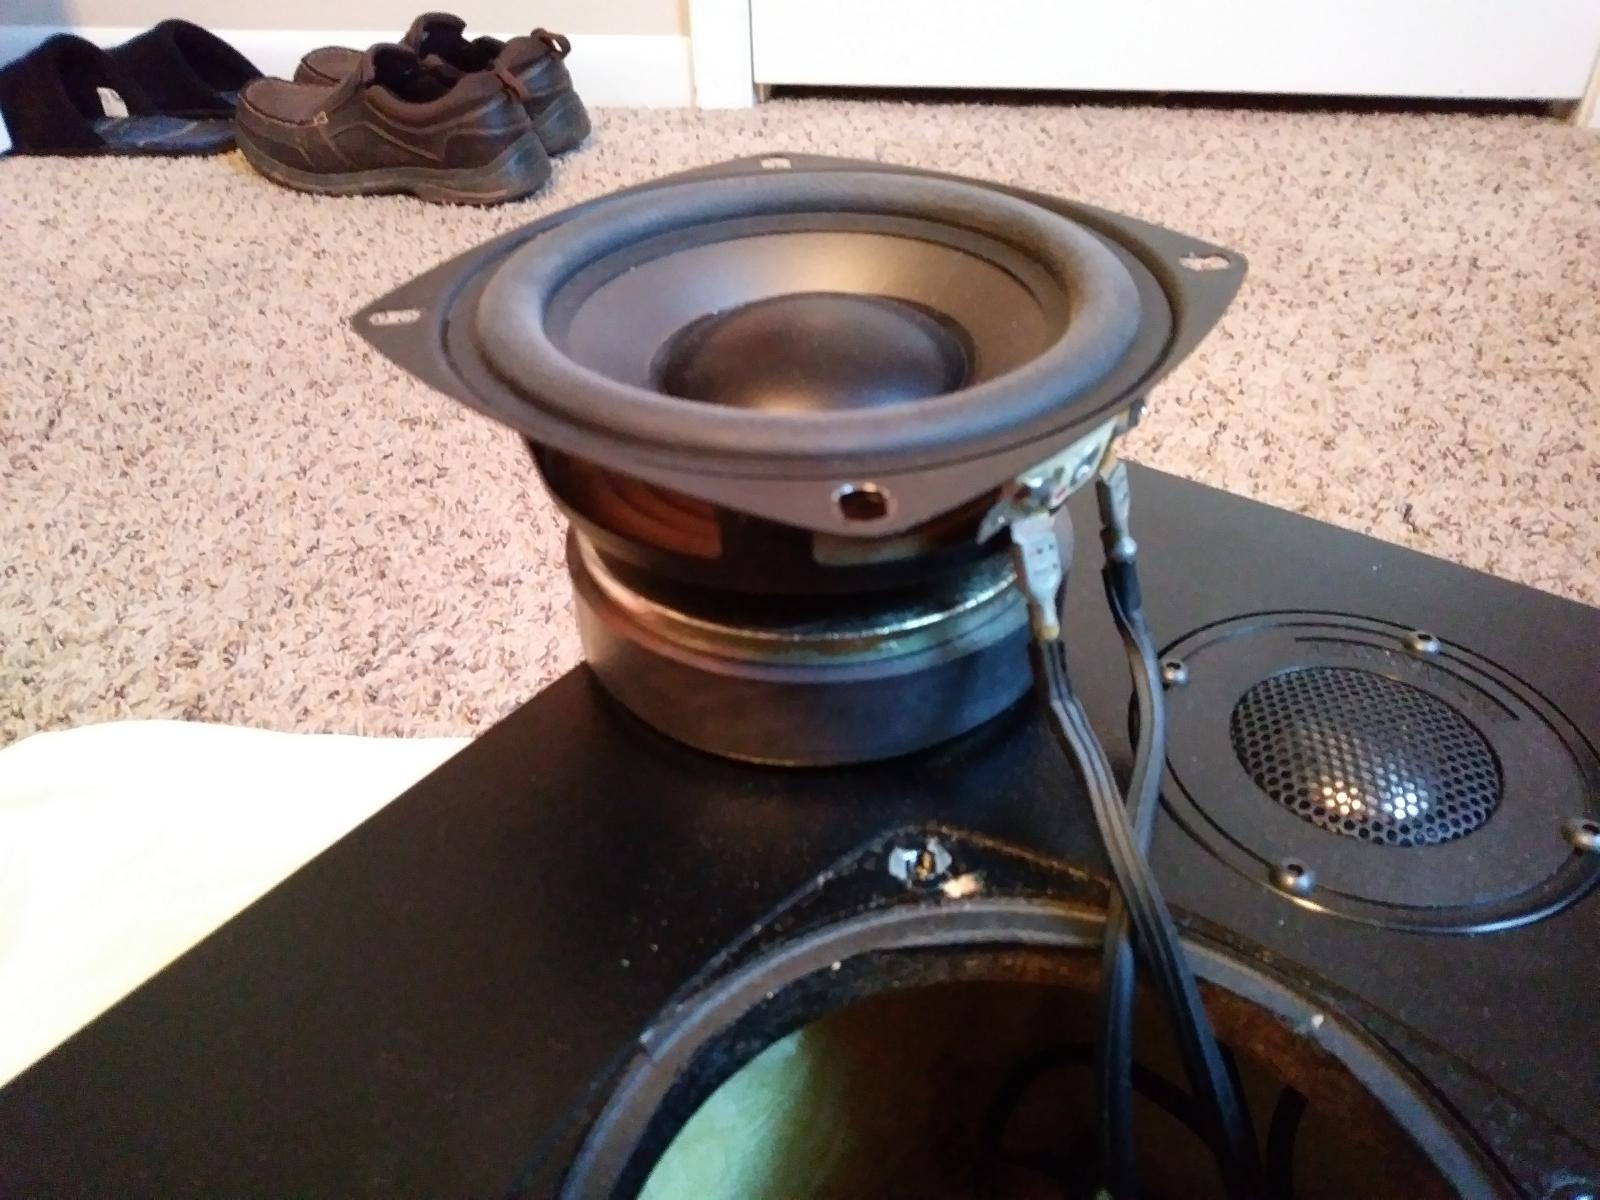 Shrinking woofer sizes for hifi ? | Page 4 | Audioholics Home Theater ...